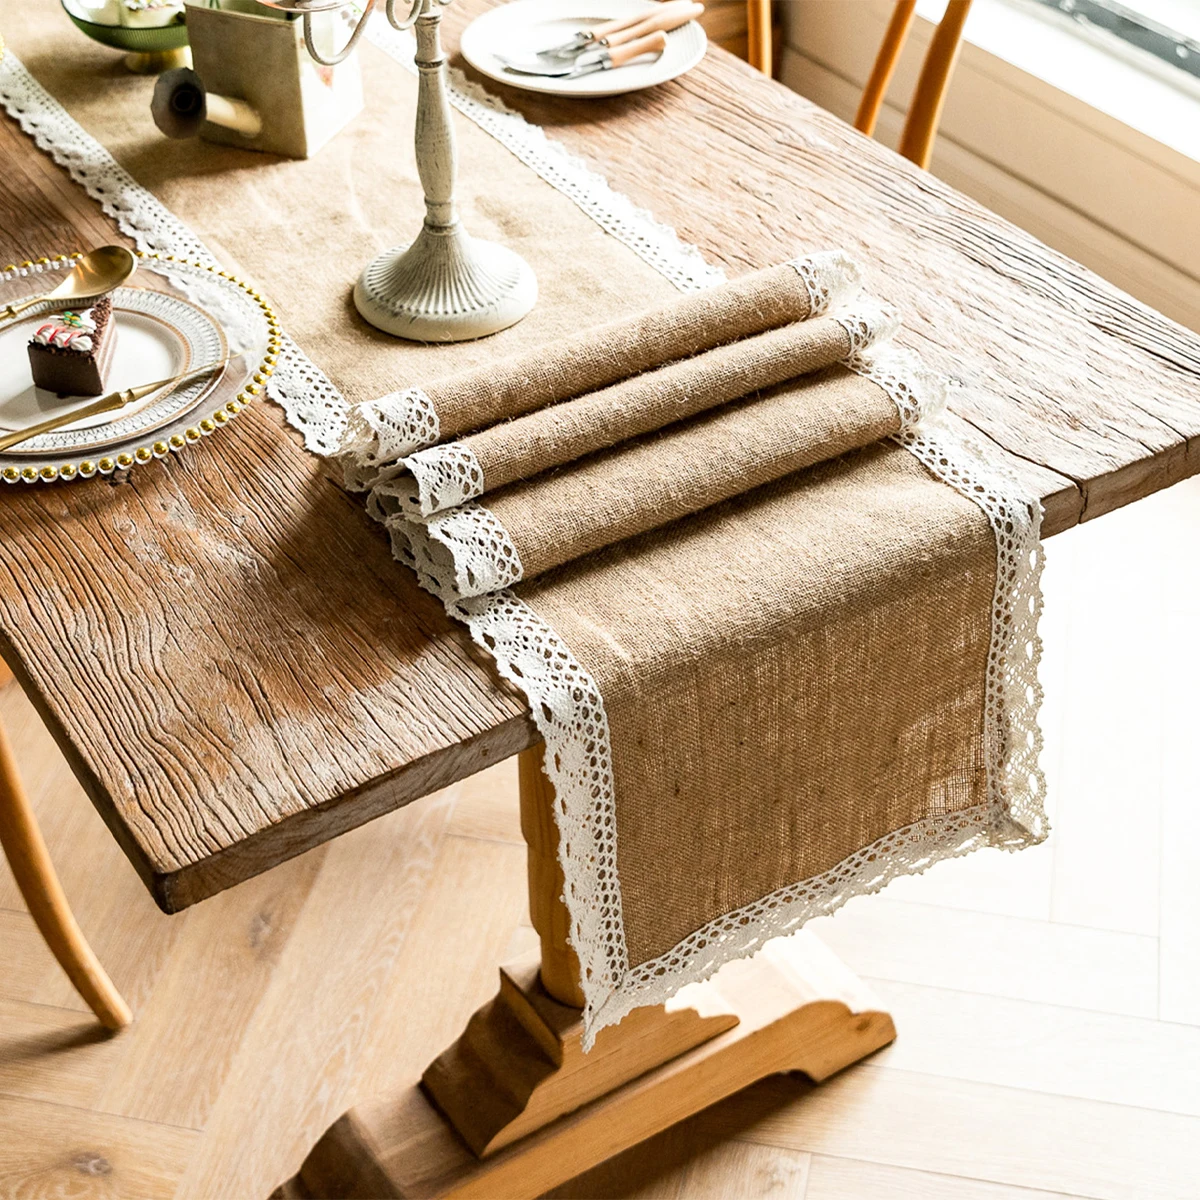 Jute Table Runner Burlap Lace Rustic Hessian Table Runner For Wedding Banquet Festival Party Catering Hotel Table Decoration